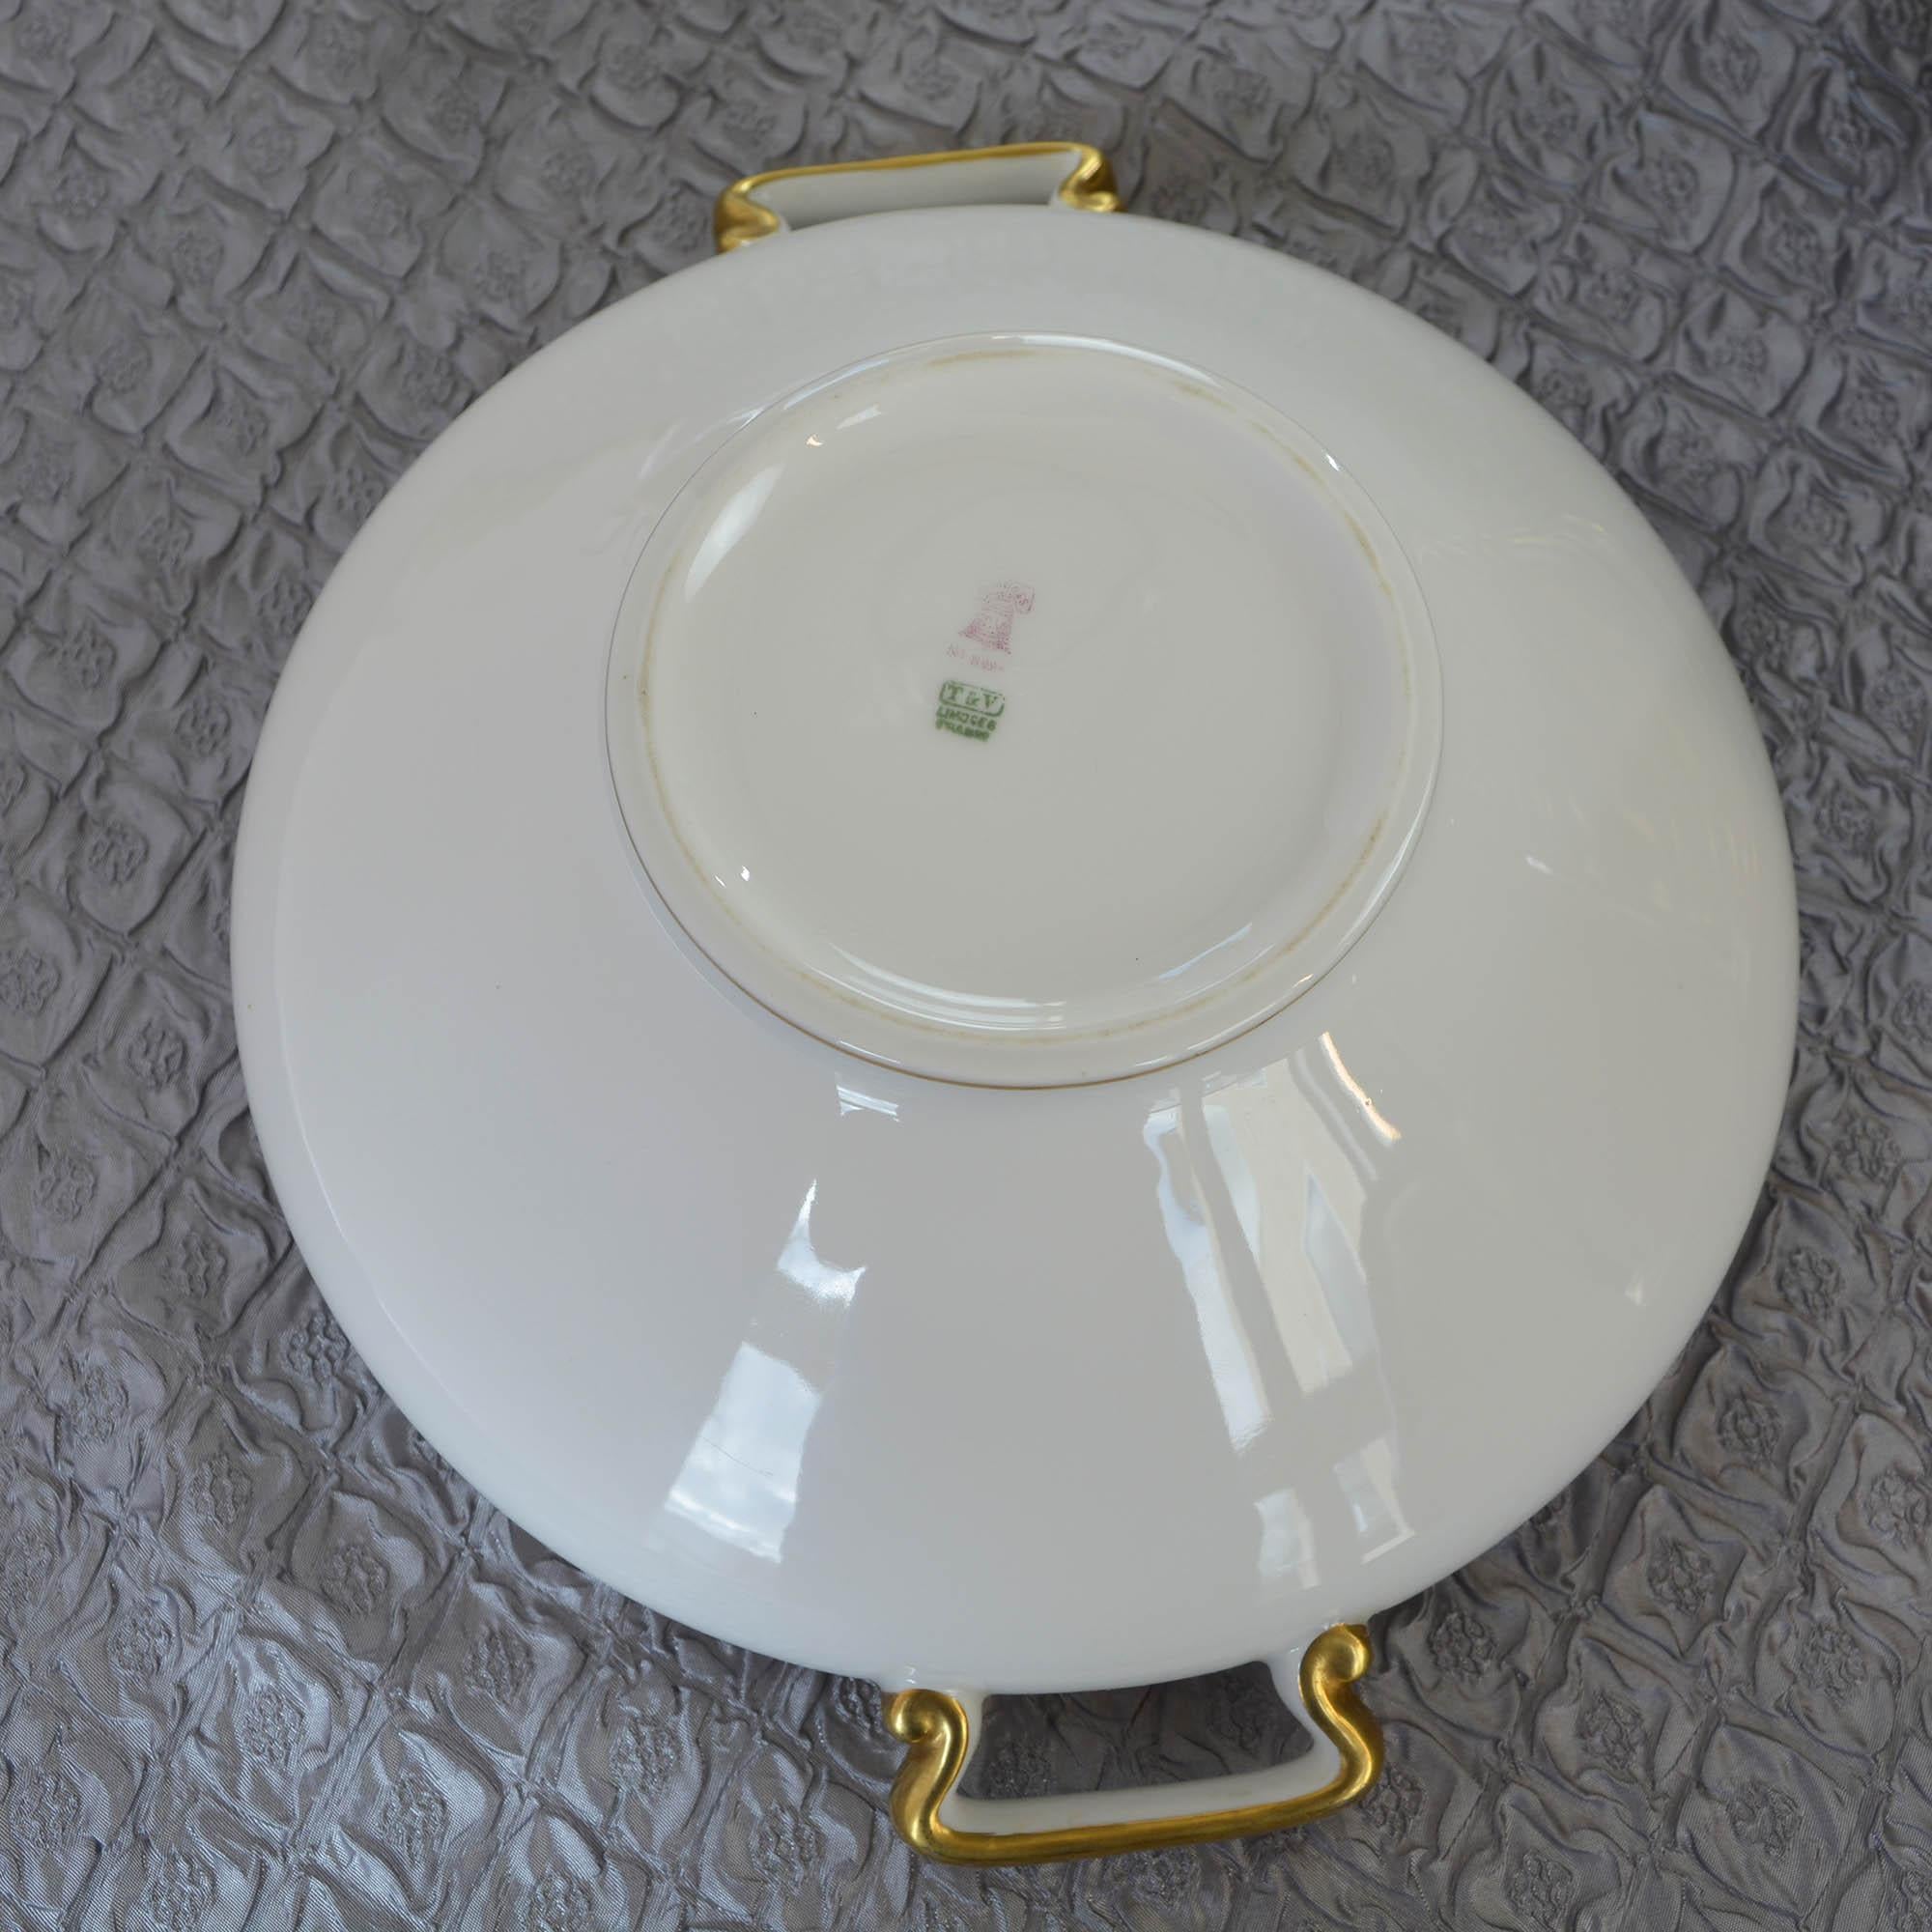 Early 20th Century 137 Piece Set China by Tressemann and Vogt of Limoges Service for 18